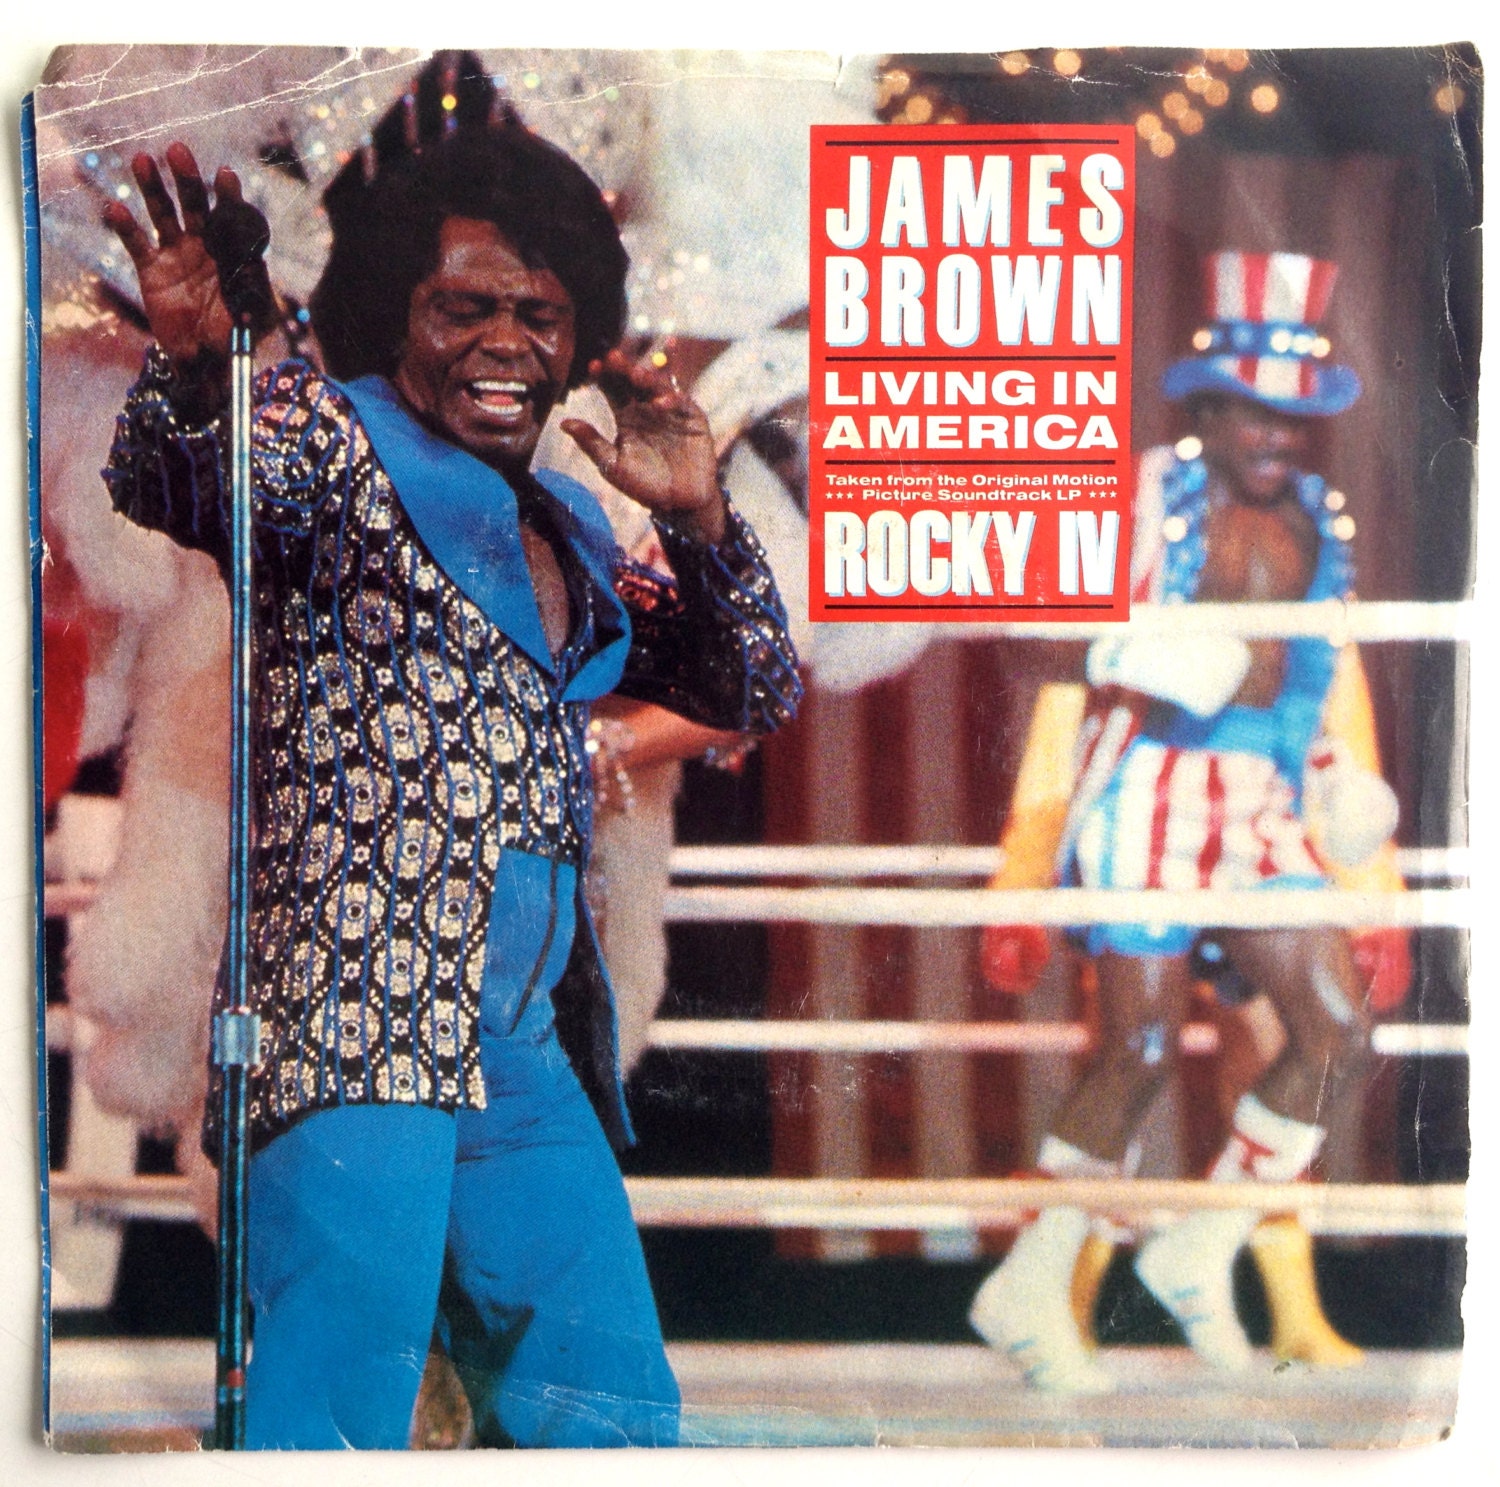 James Brown Discography at Discogs